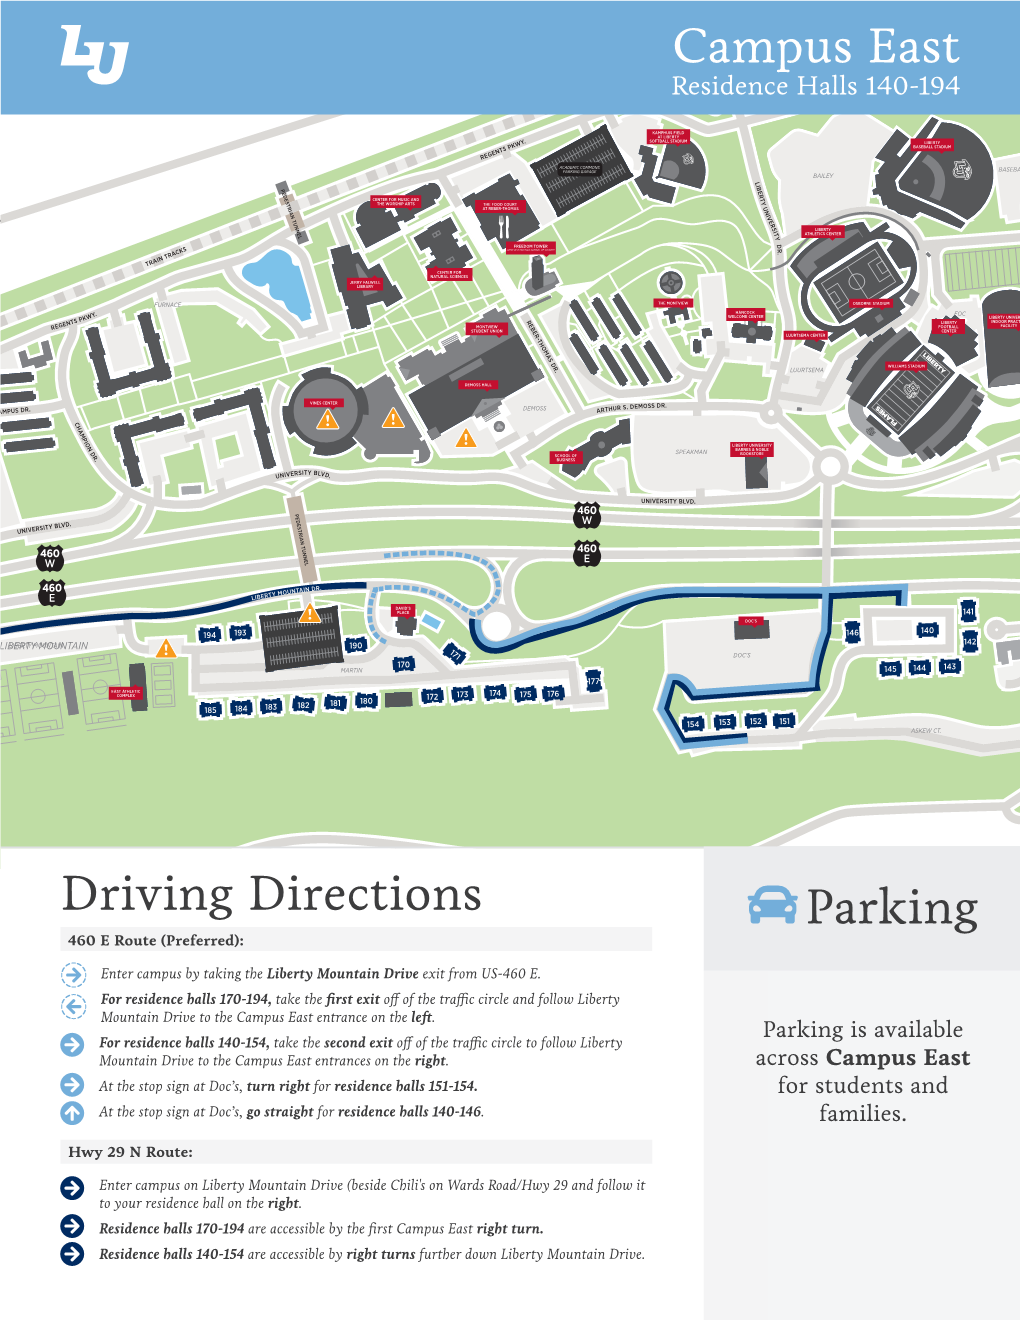 Campus East Driving Directions Parking